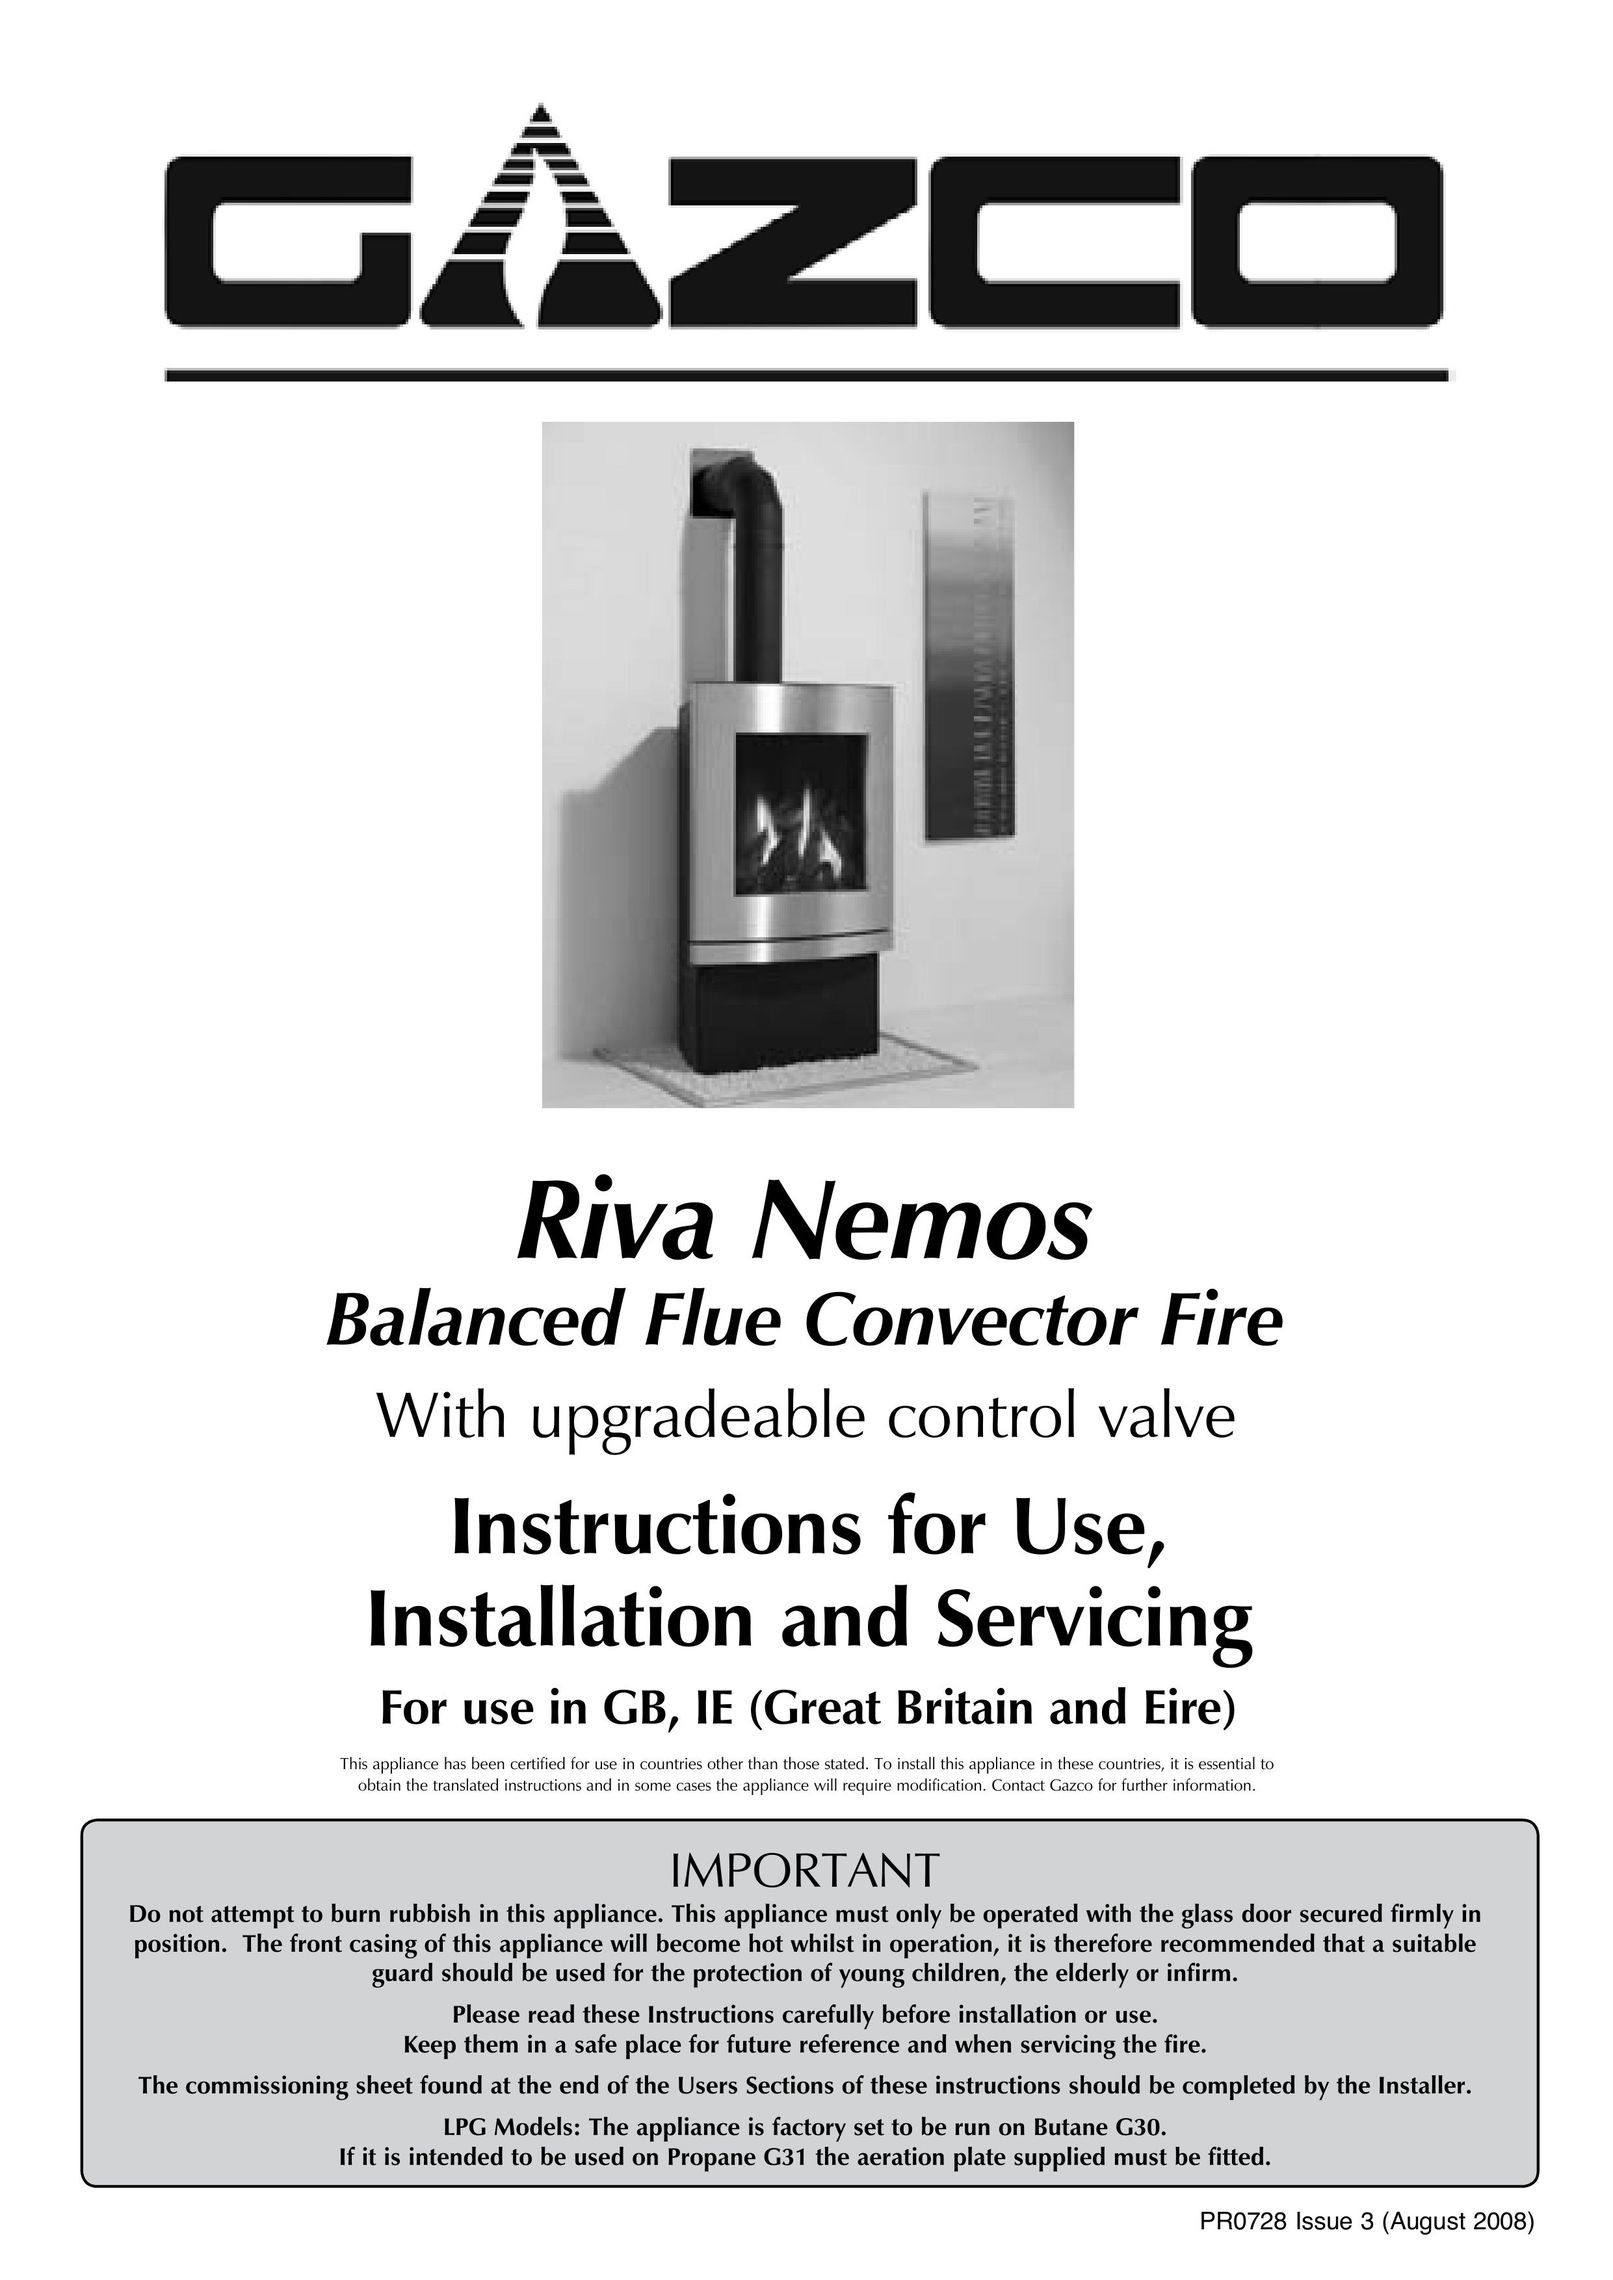 Stovax 8627 BS Indoor Fireplace User Manual